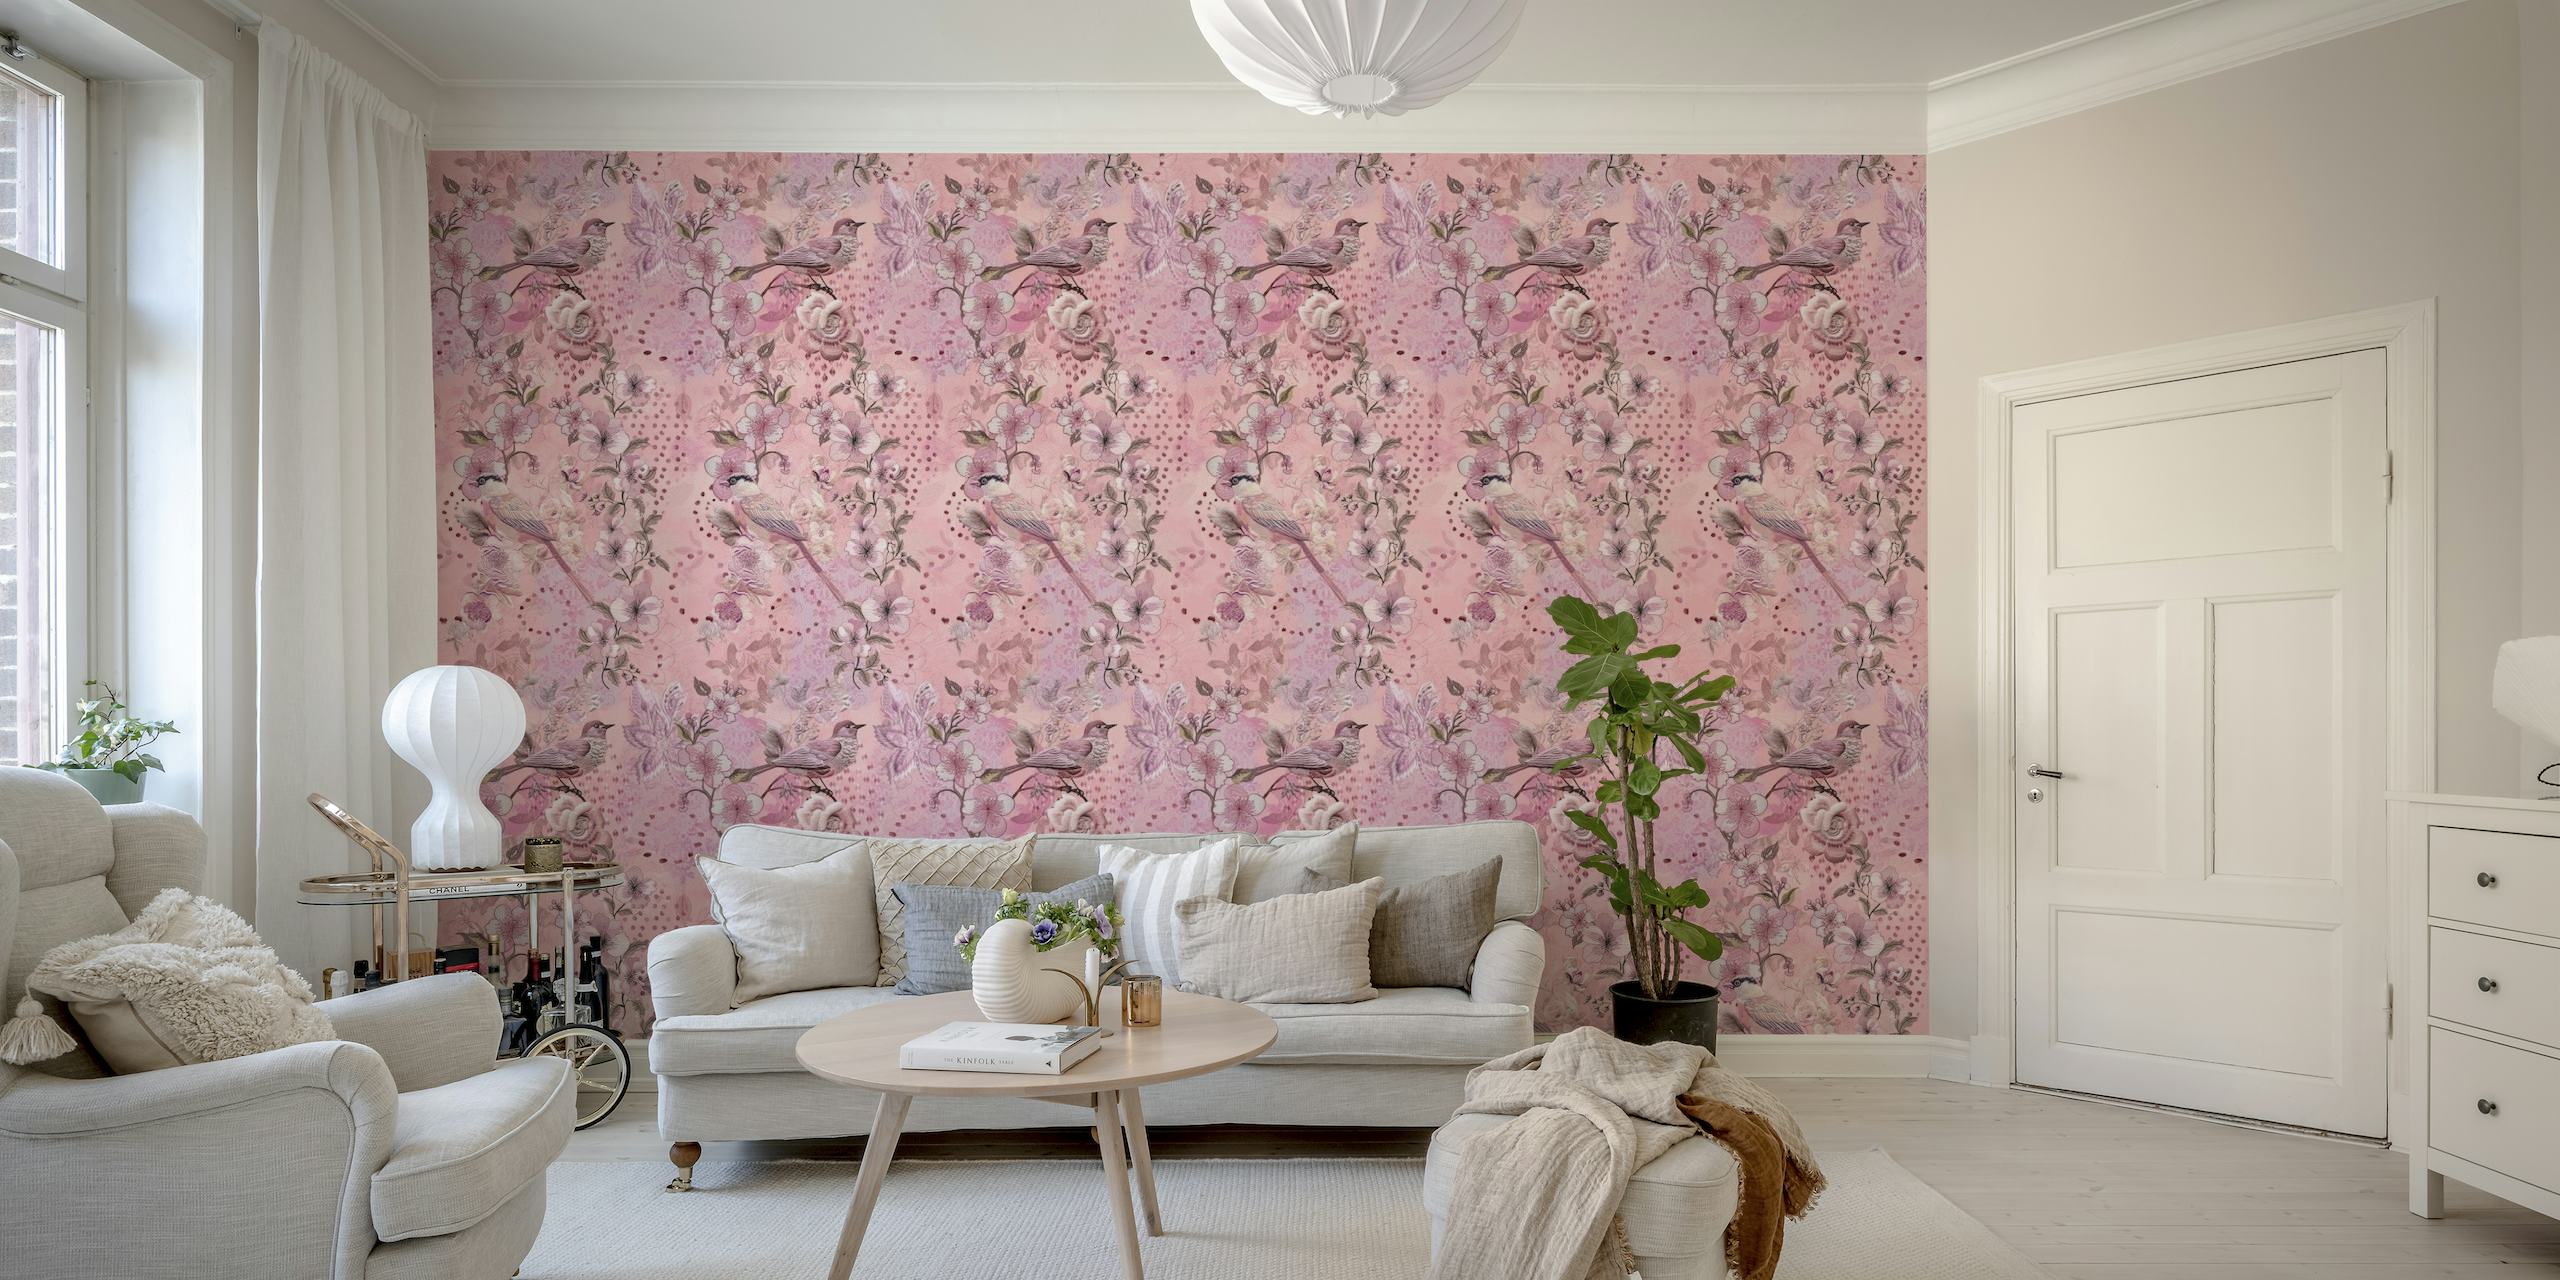 Embroidery-style birds and flowers wall mural in pink tones